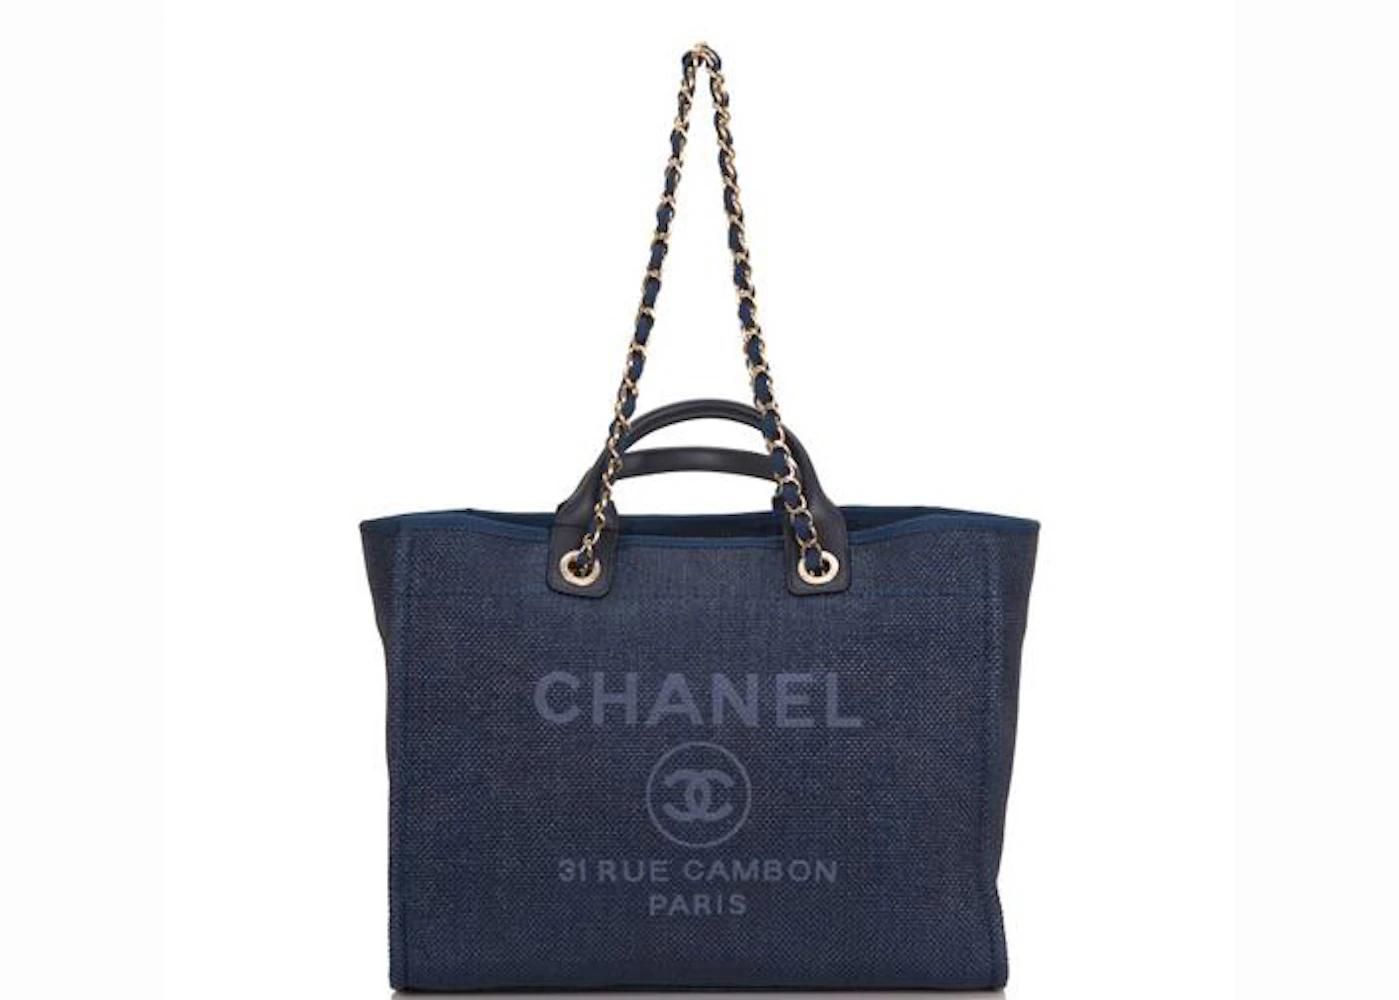 sharealivecloset on X: “Outfit of the day” CHANEL DEAUVILLE LARGE